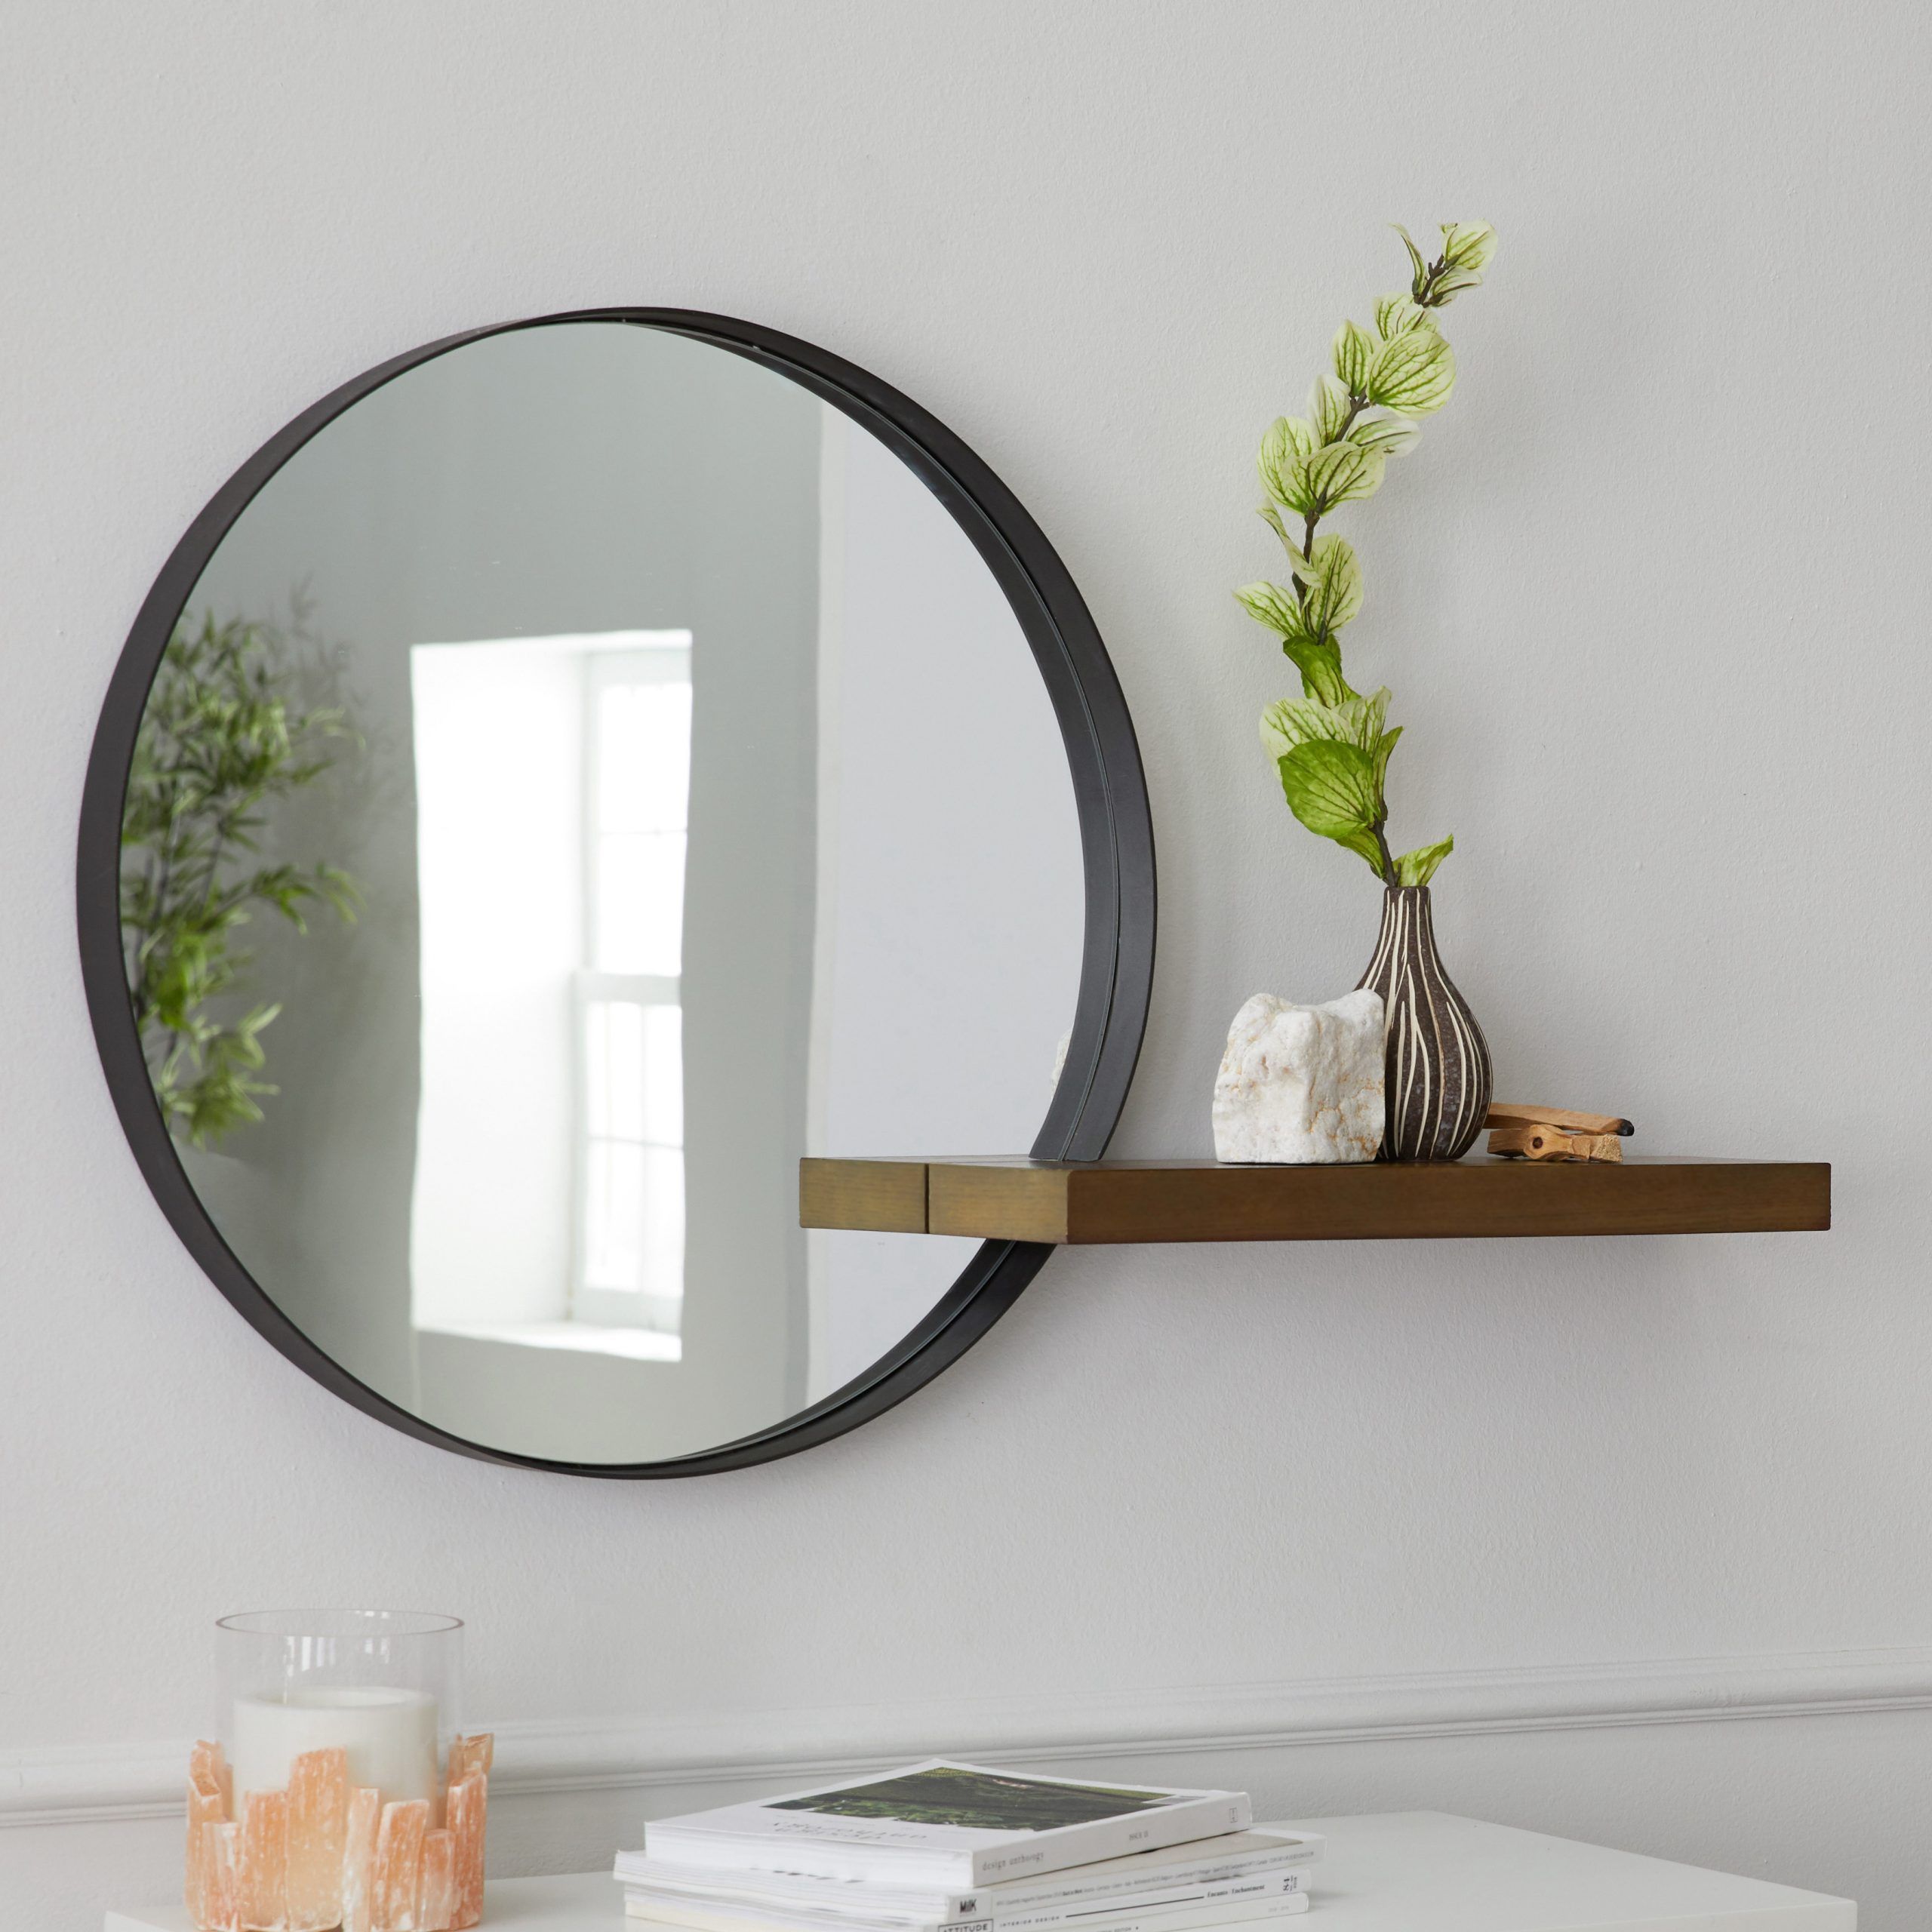 Modrn Naturals Metal Framed Round Decorative Wall Mirror With Wood Throughout Woven Metal Round Wall Mirrors (View 11 of 15)